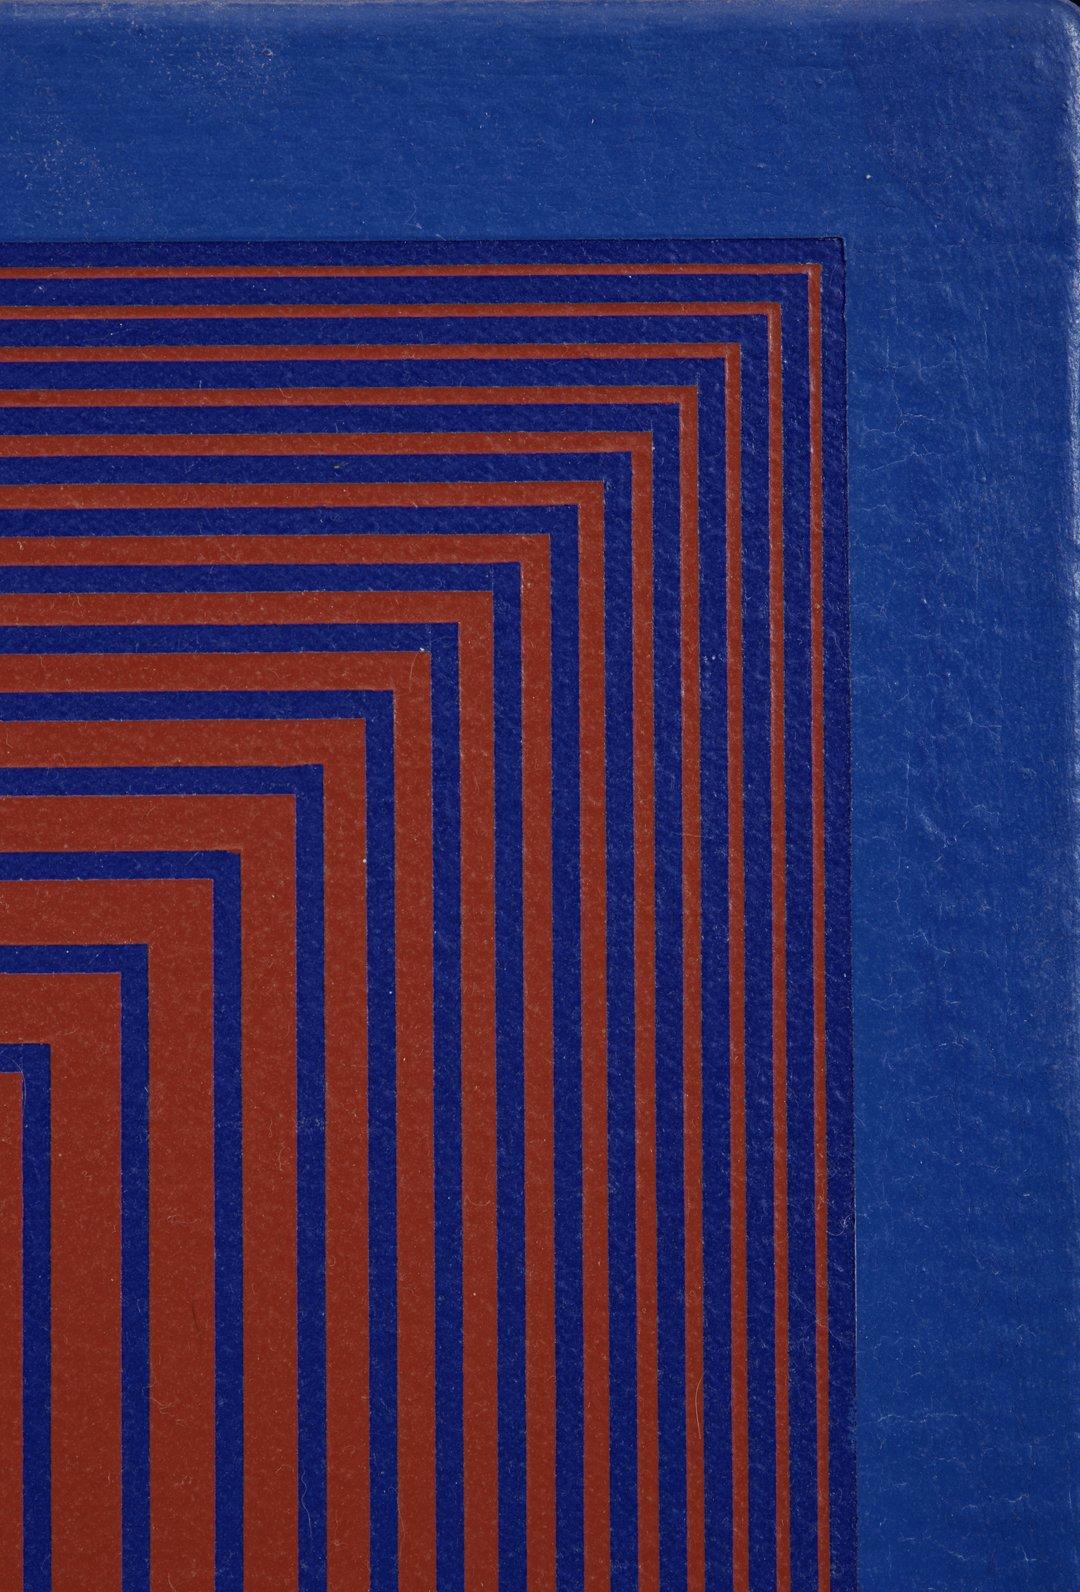 Temple of Evening Reds, 1983 Acrylic OpArt by Cleveland School Artist - Op Art Painting by Richard Anuszkiewicz